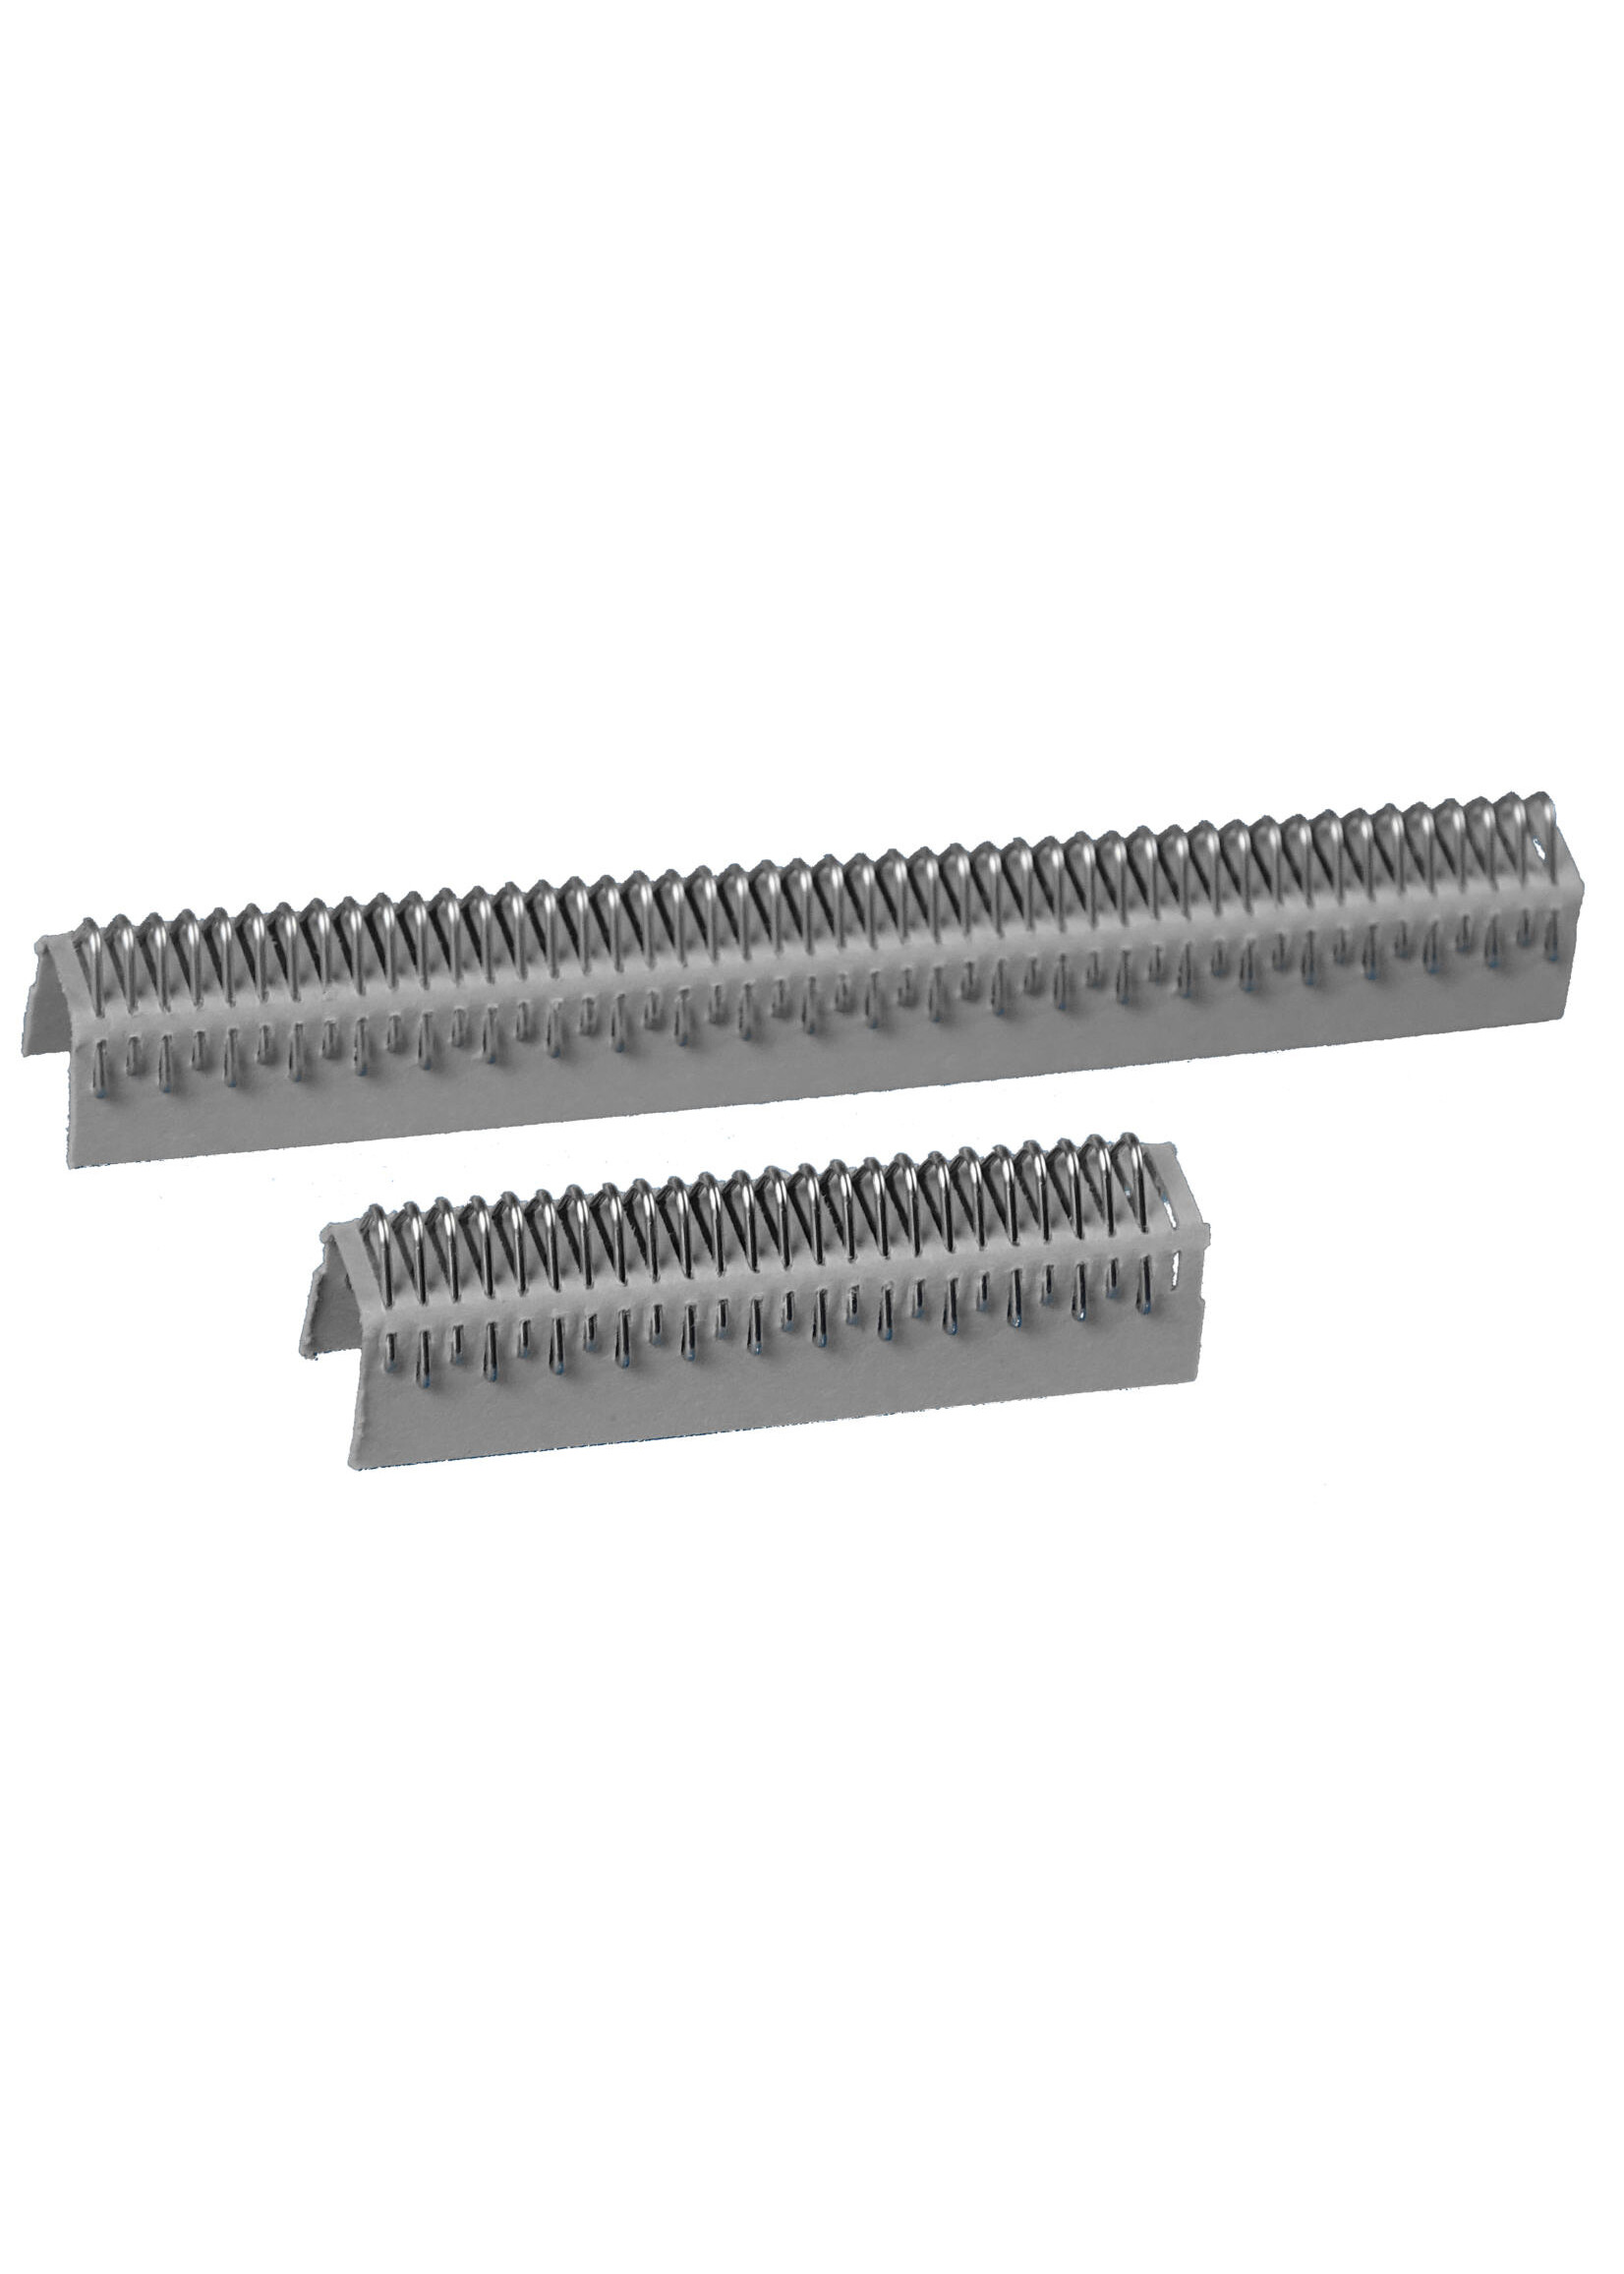 Solana Connectors for belts 1,5 - 2,5 mm thick